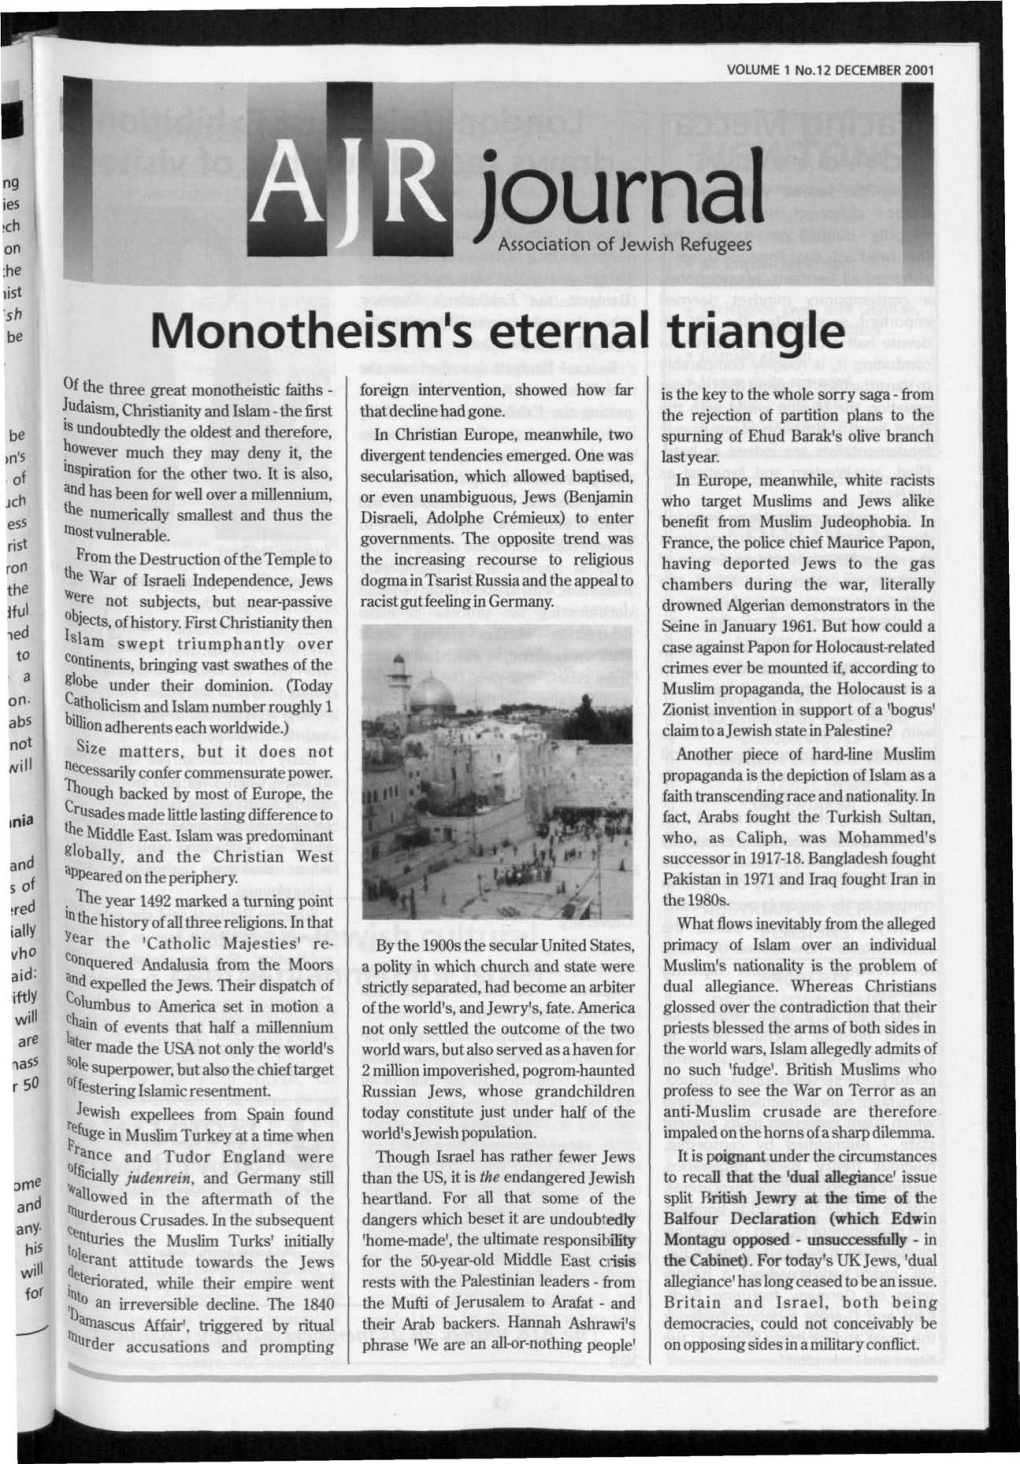 Monotheism's Eternal Triangle